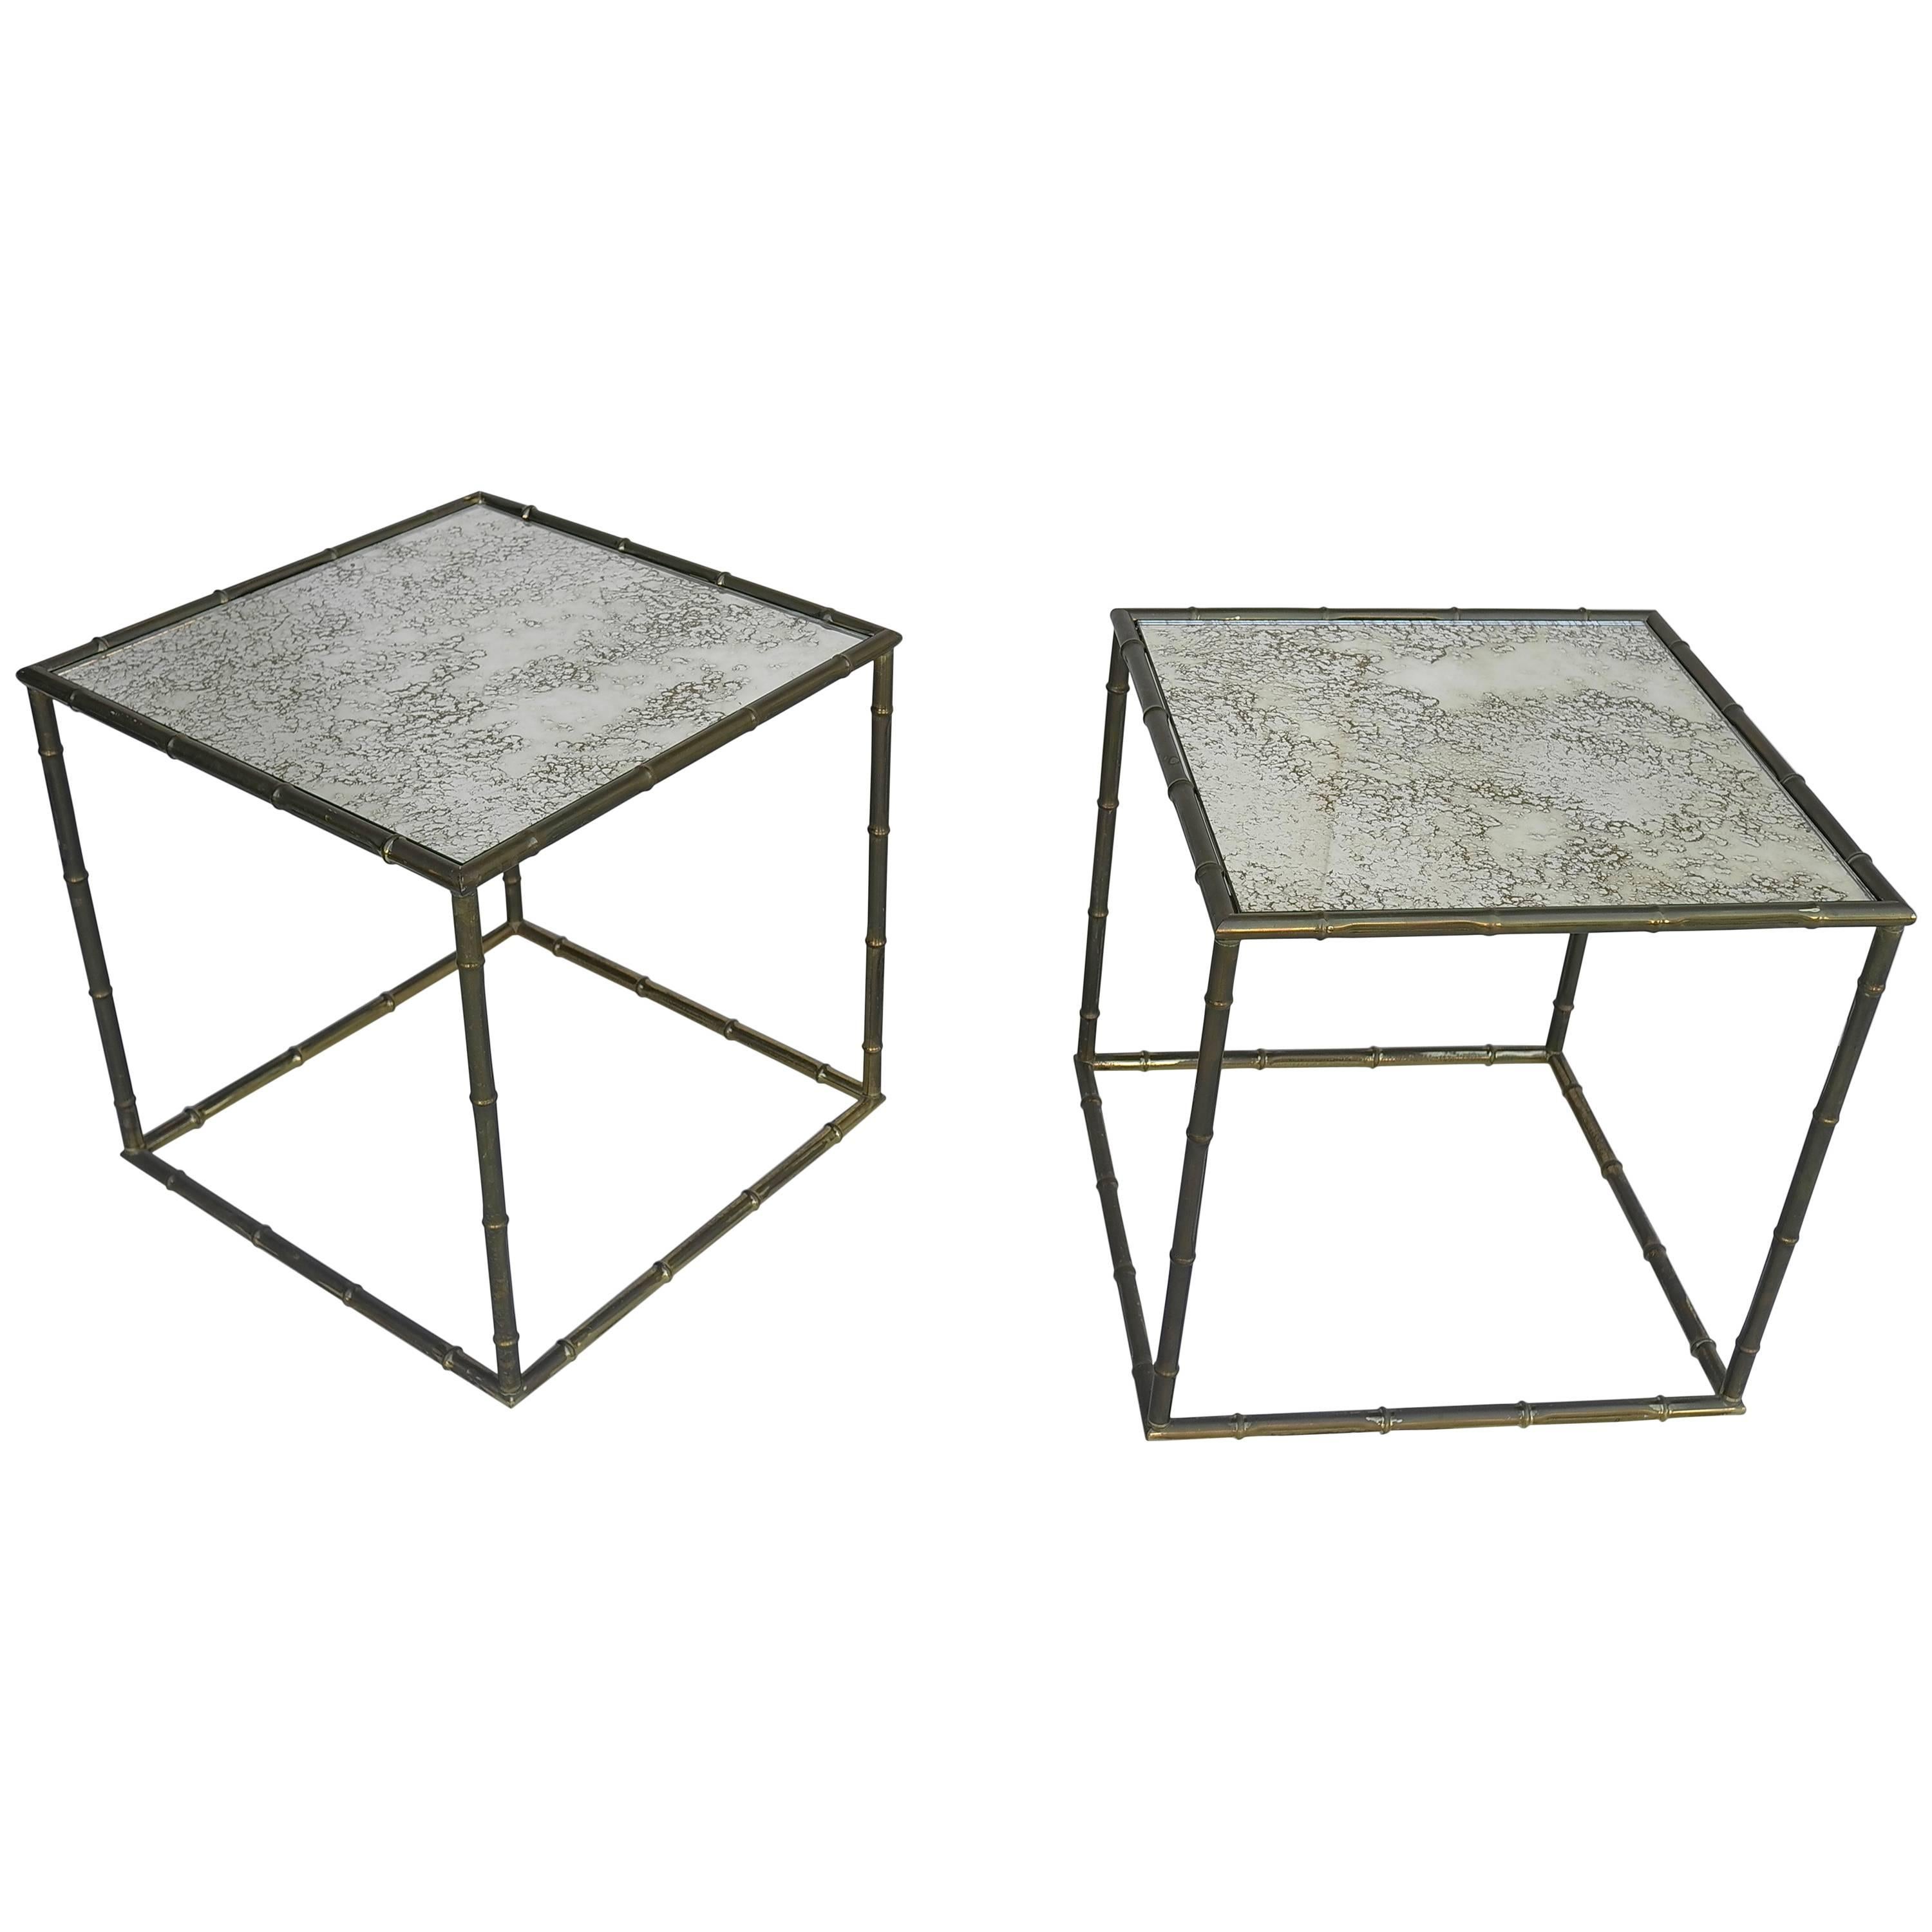 Pair of French Square Gold Metal Bamboo Tables with Mirrored Top